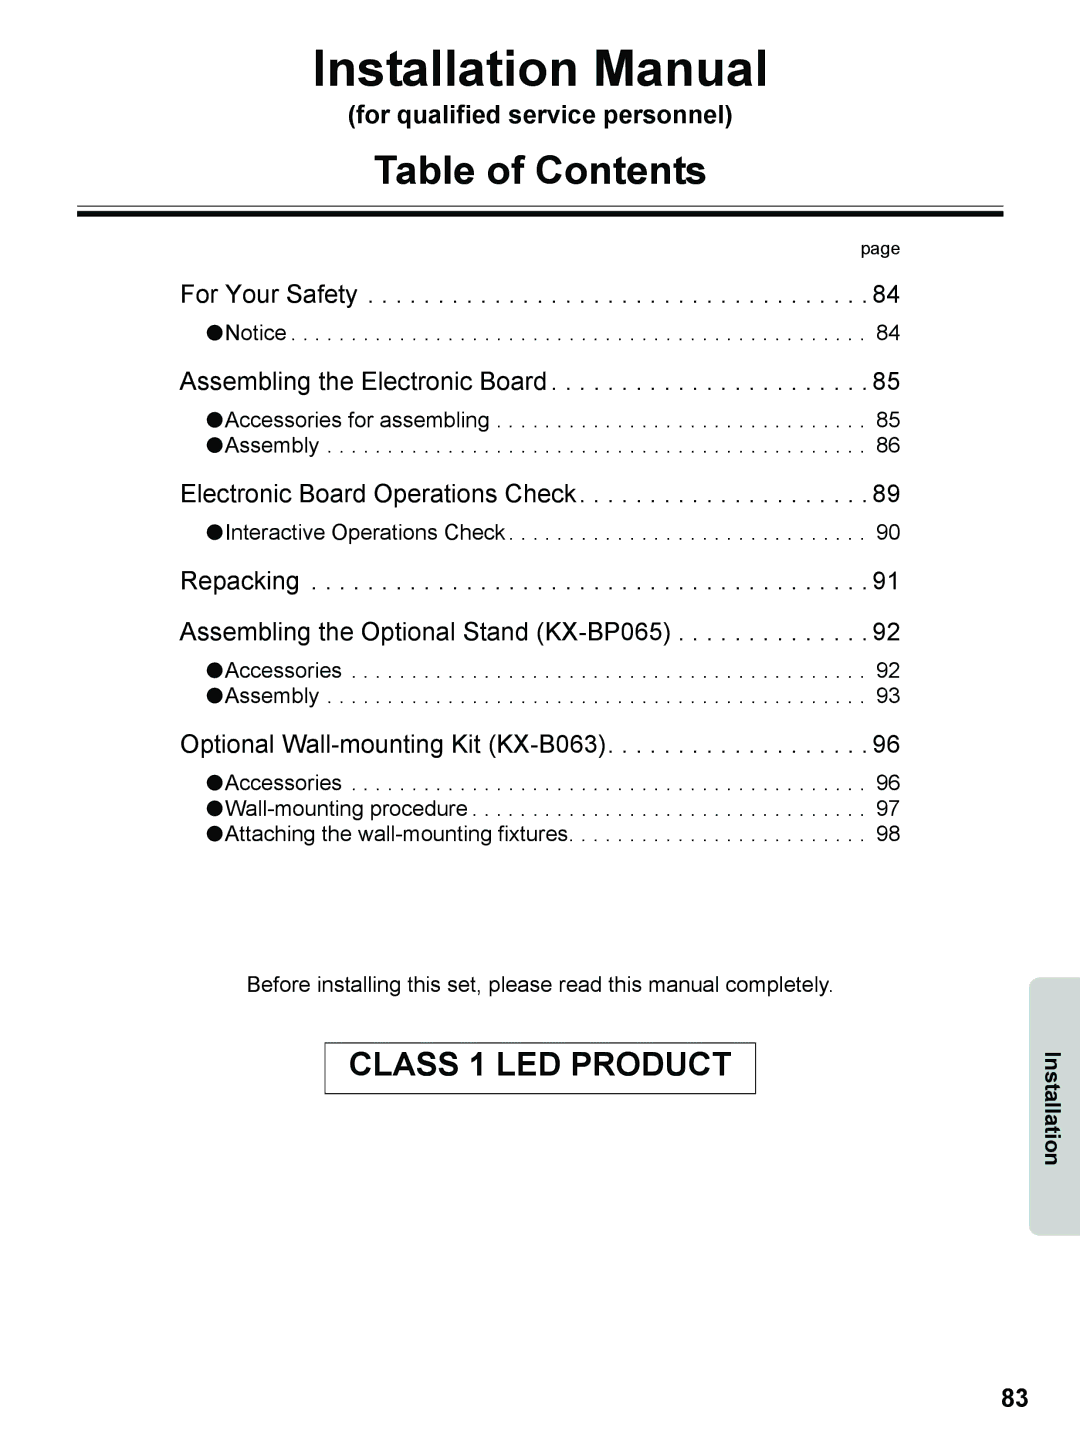 Panasonic UB-8325 operating instructions Installation Manual, For qualified service personnel 